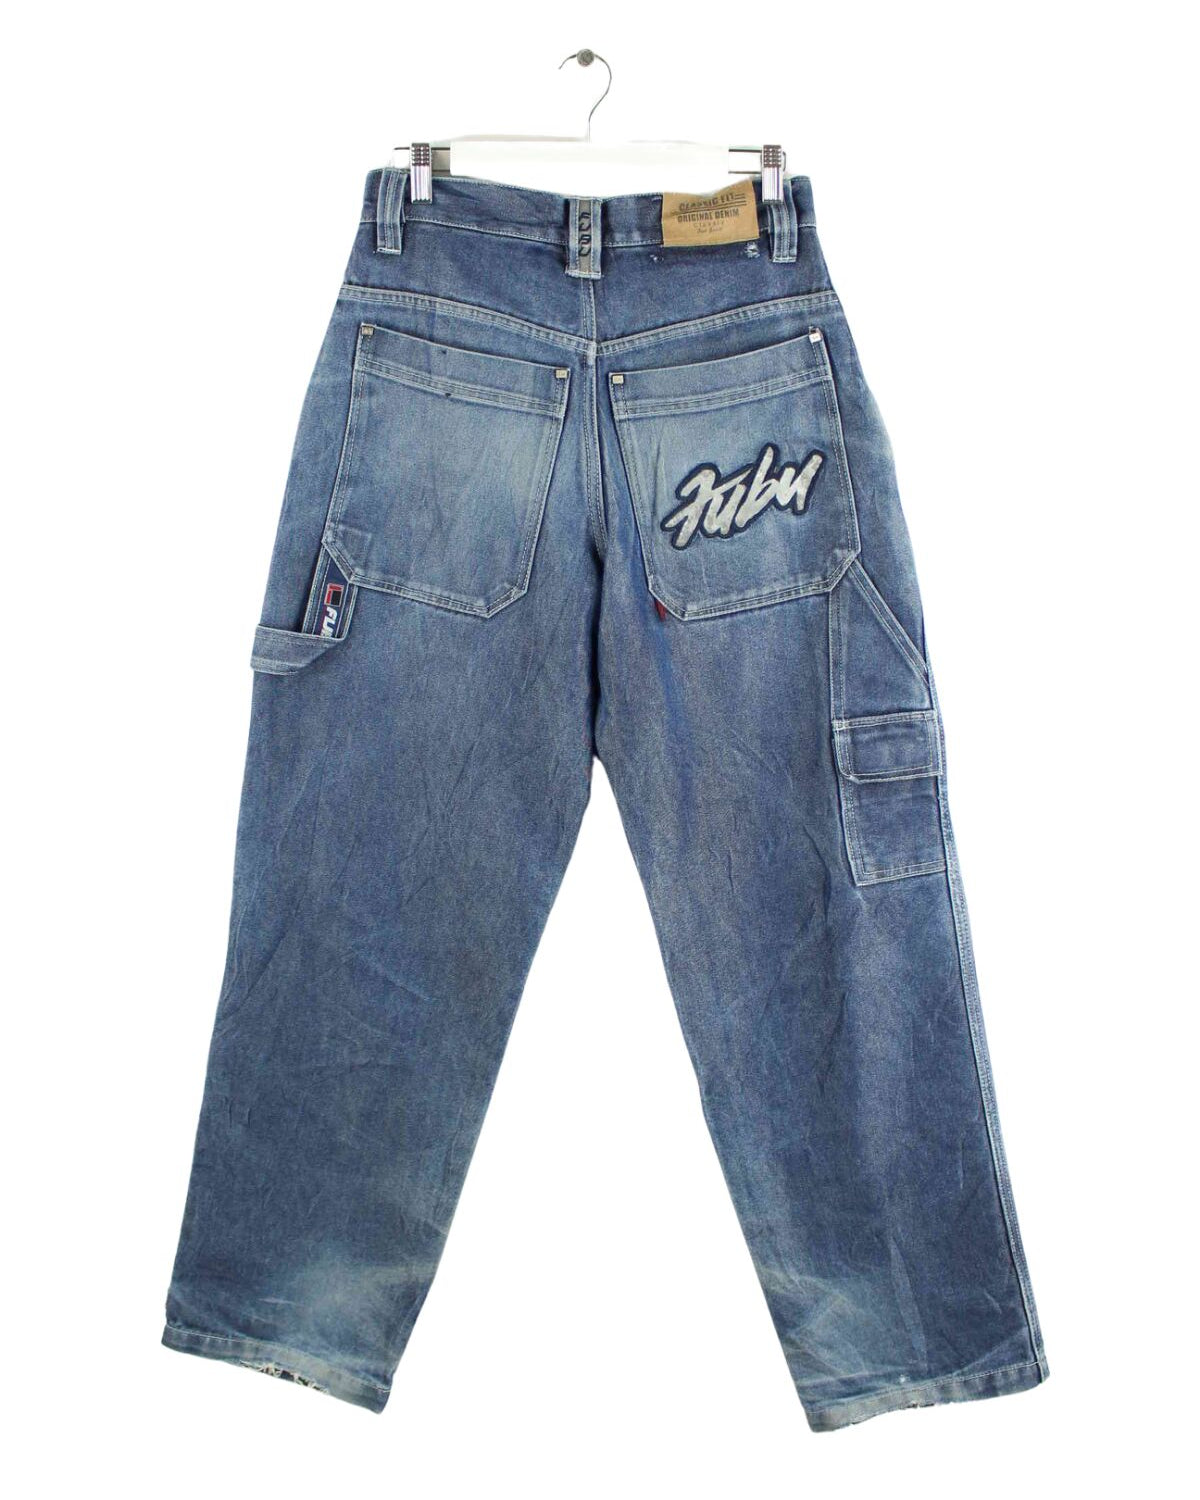 Fubu y2k Classic Fit Embroidered Jeans Blau W30 L32 (front image)